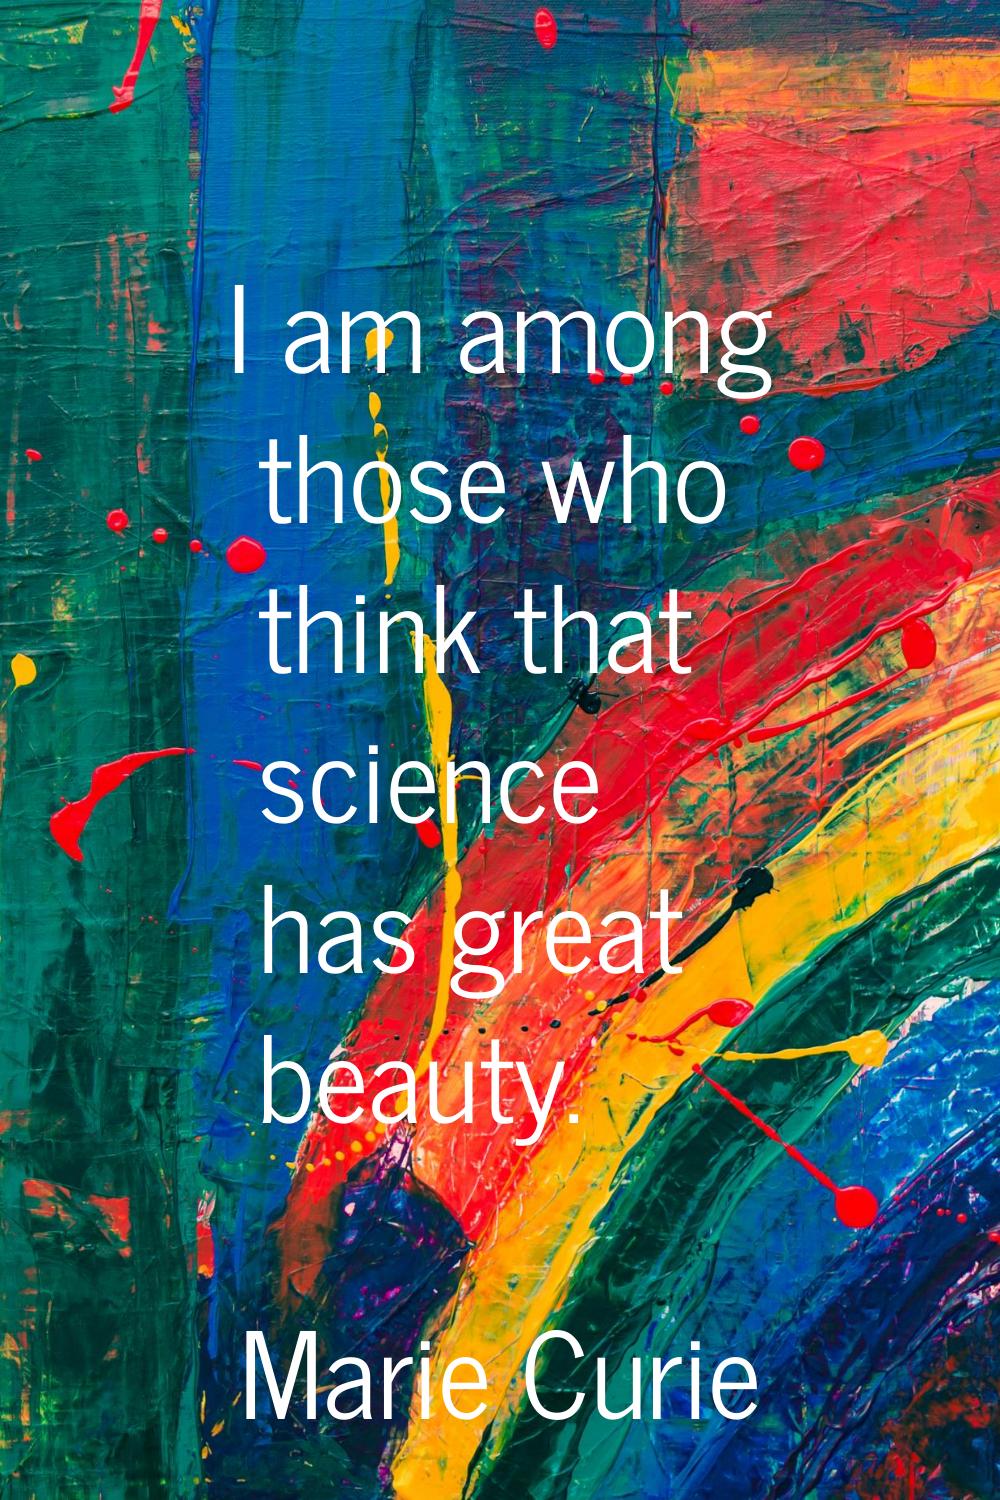 I am among those who think that science has great beauty.